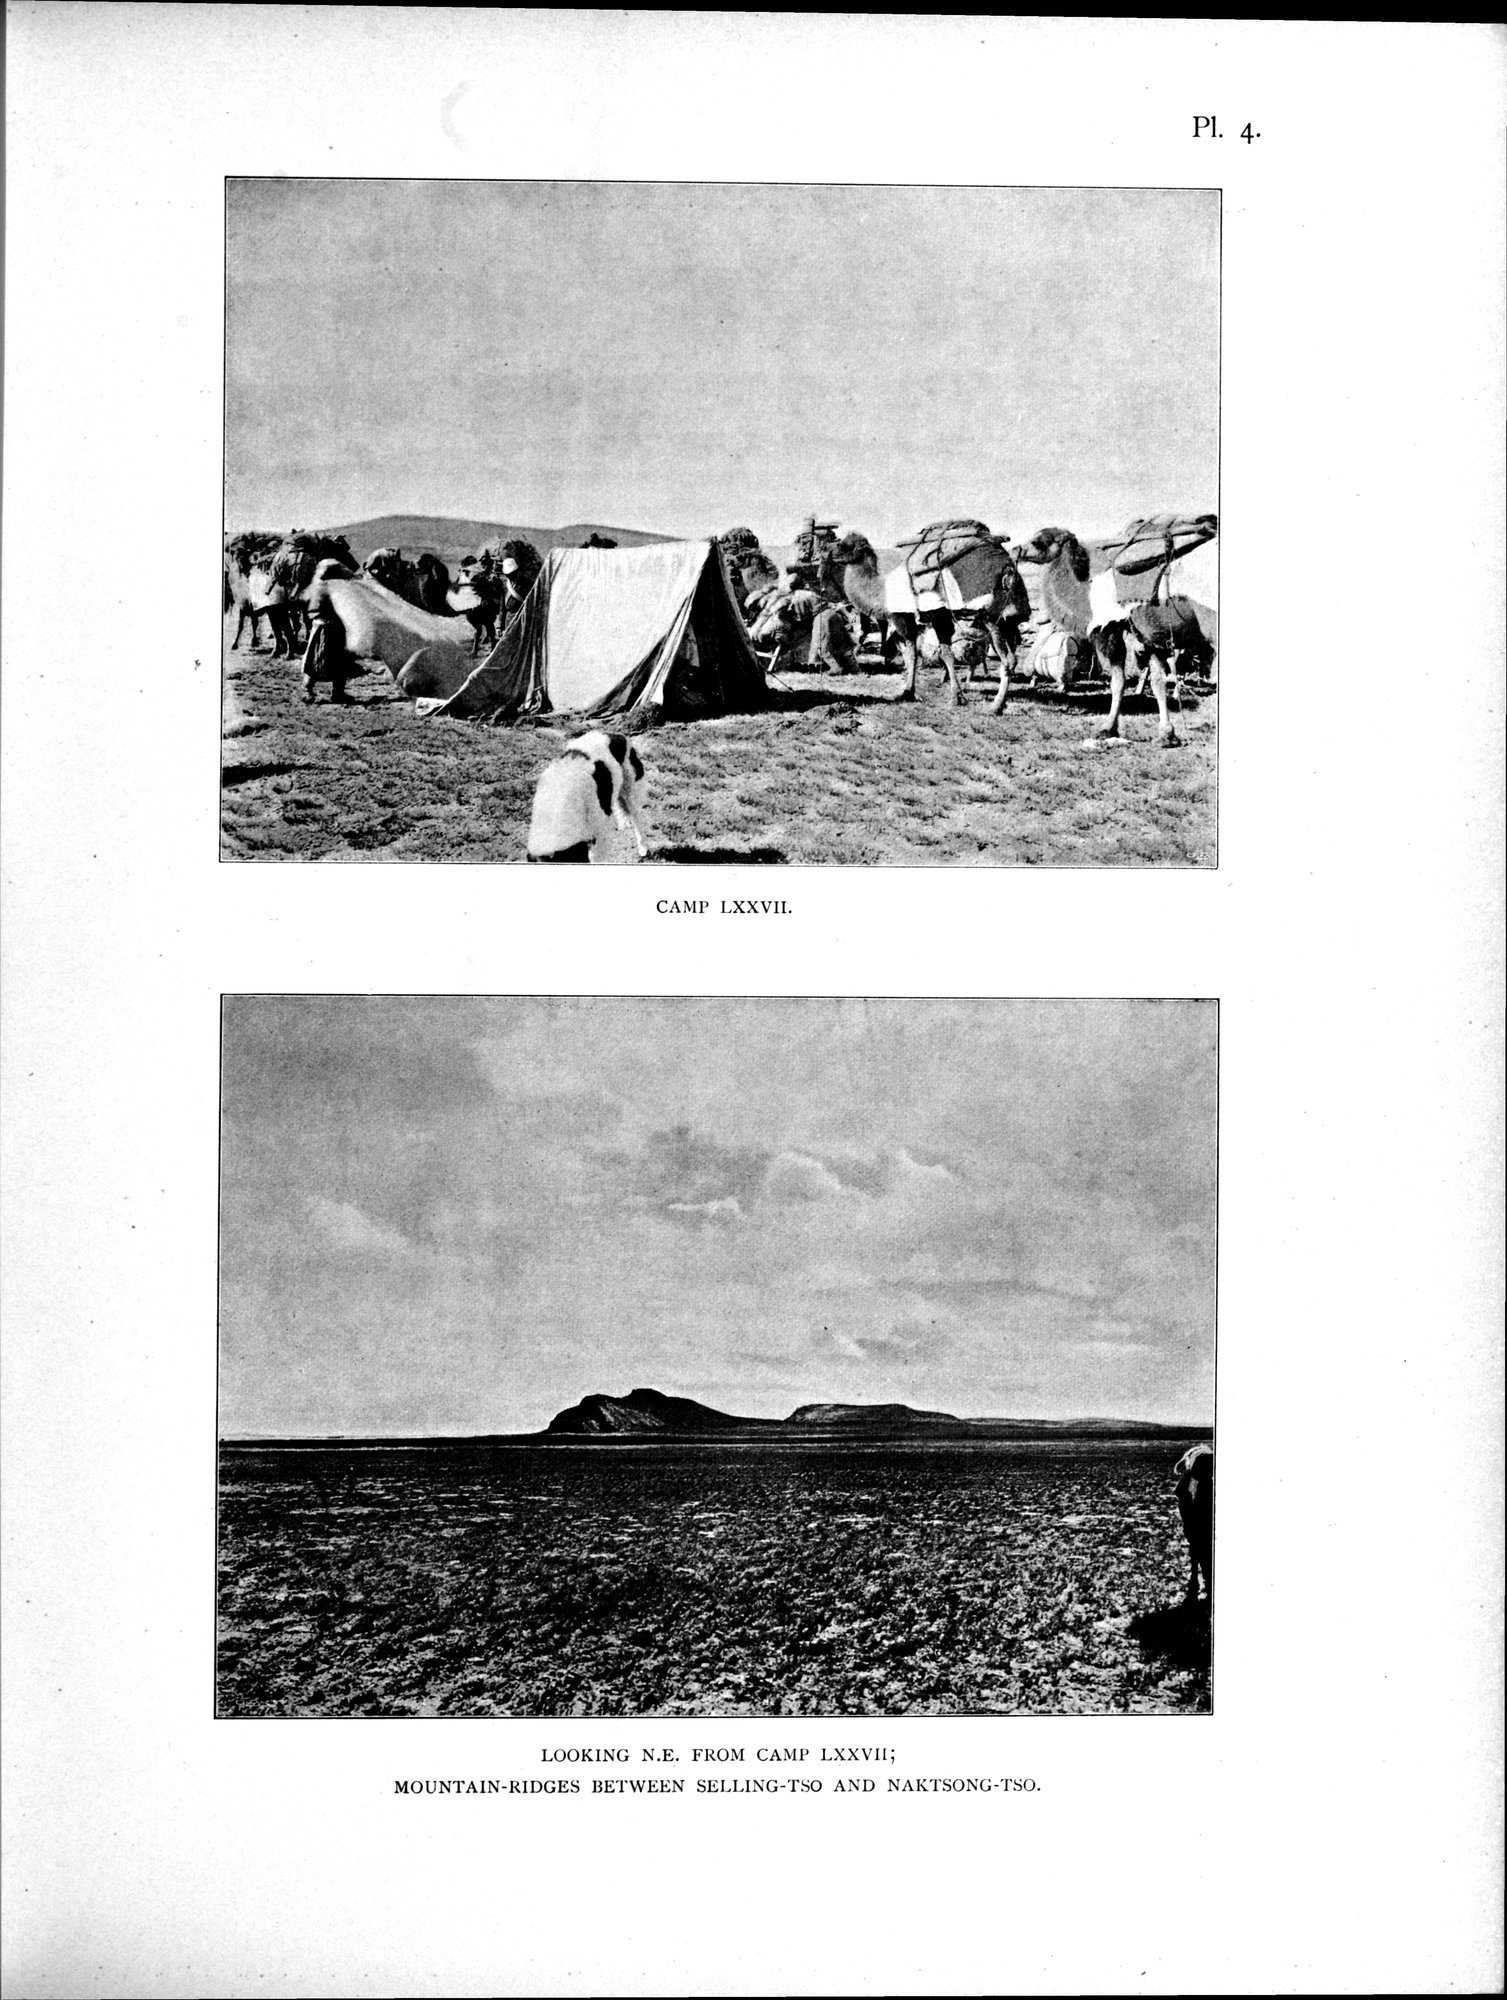 Scientific Results of a Journey in Central Asia, 1899-1902 : vol.4 / 59 ページ（白黒高解像度画像）